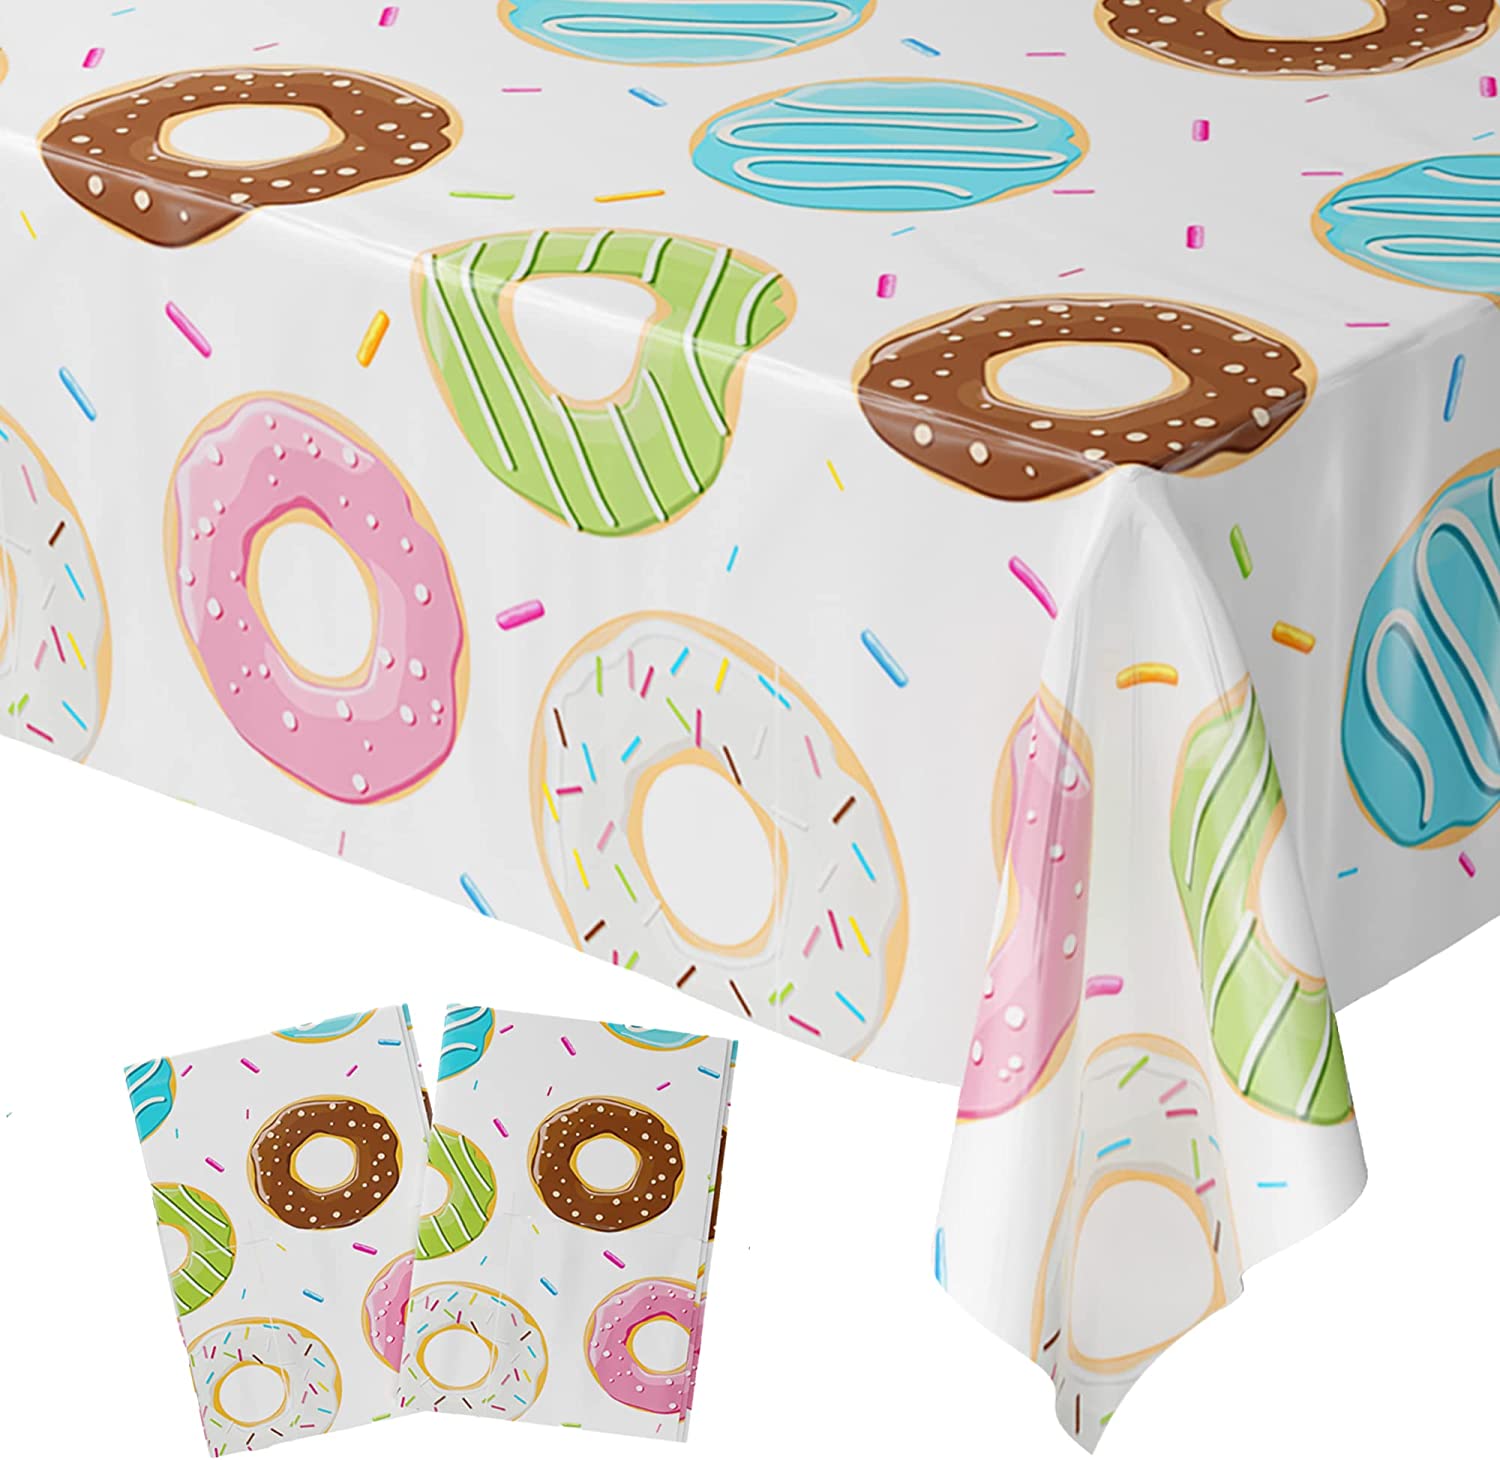 108” x 54” plastic table covers with Donut print